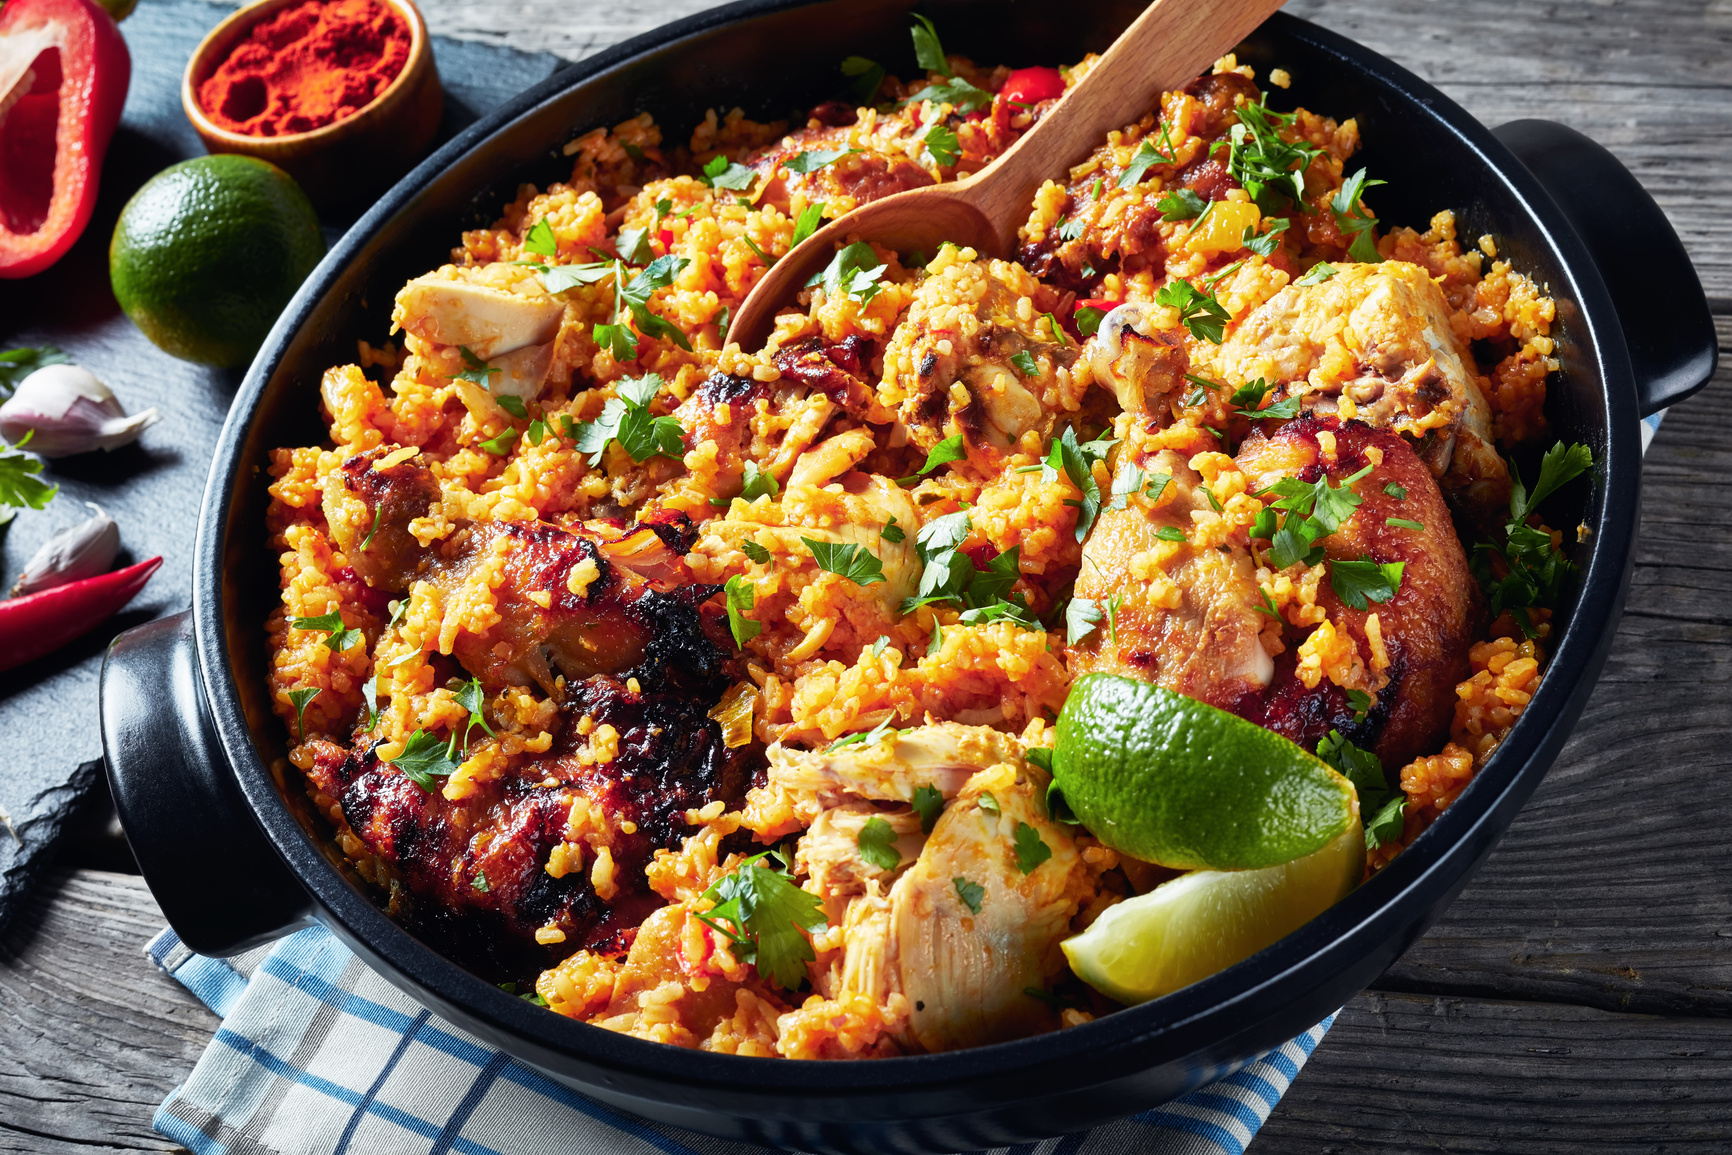 Arroz con pollo, spanish cuisine, white long grain rice with chicken and vegetables